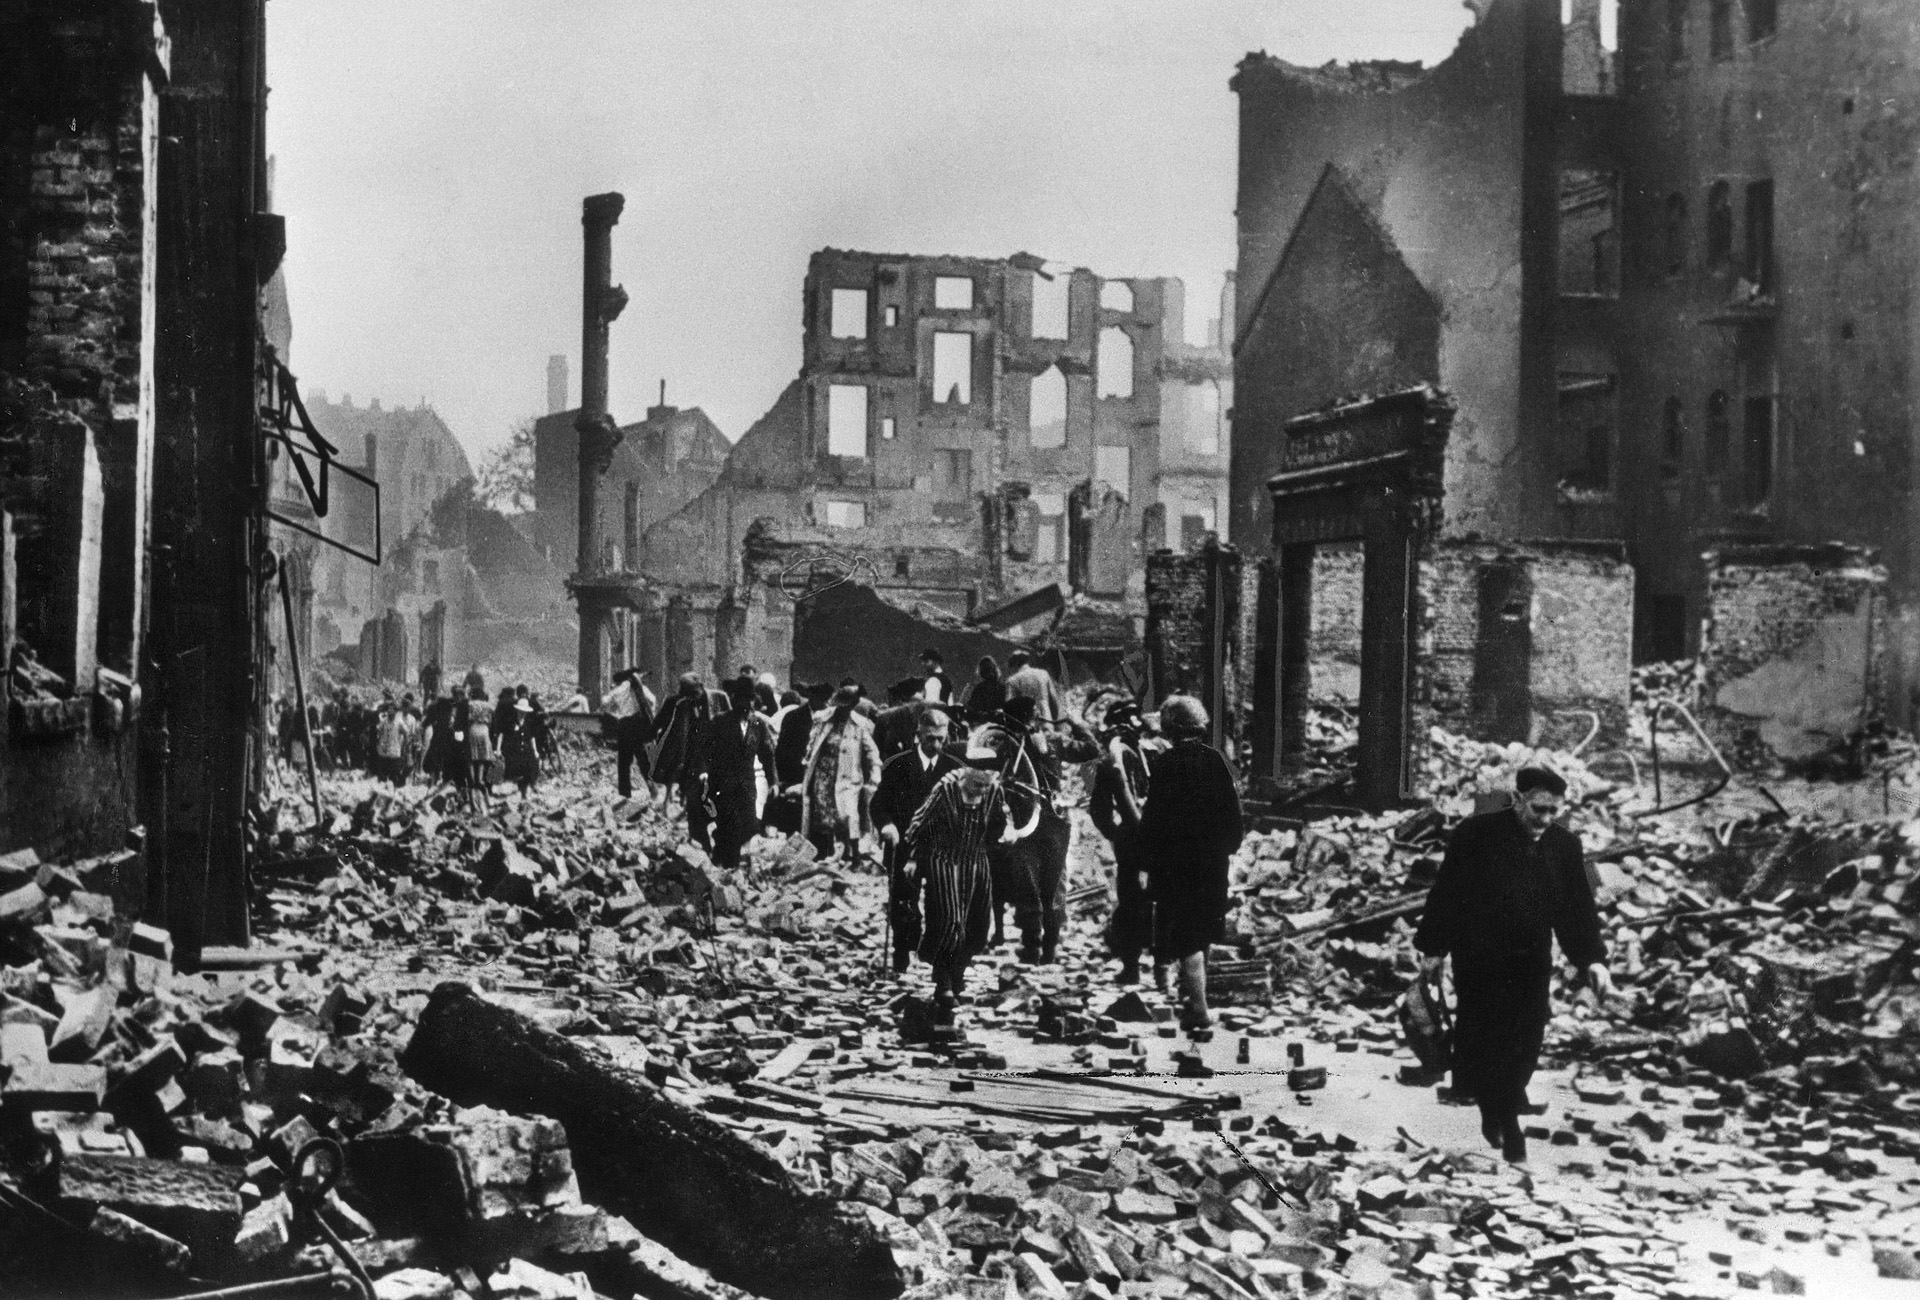 Citizens of Hamburg, Germany, pick their way through the rubble of their city during the Allies’ week-long Operation Gomorrah air raids in July 1943.